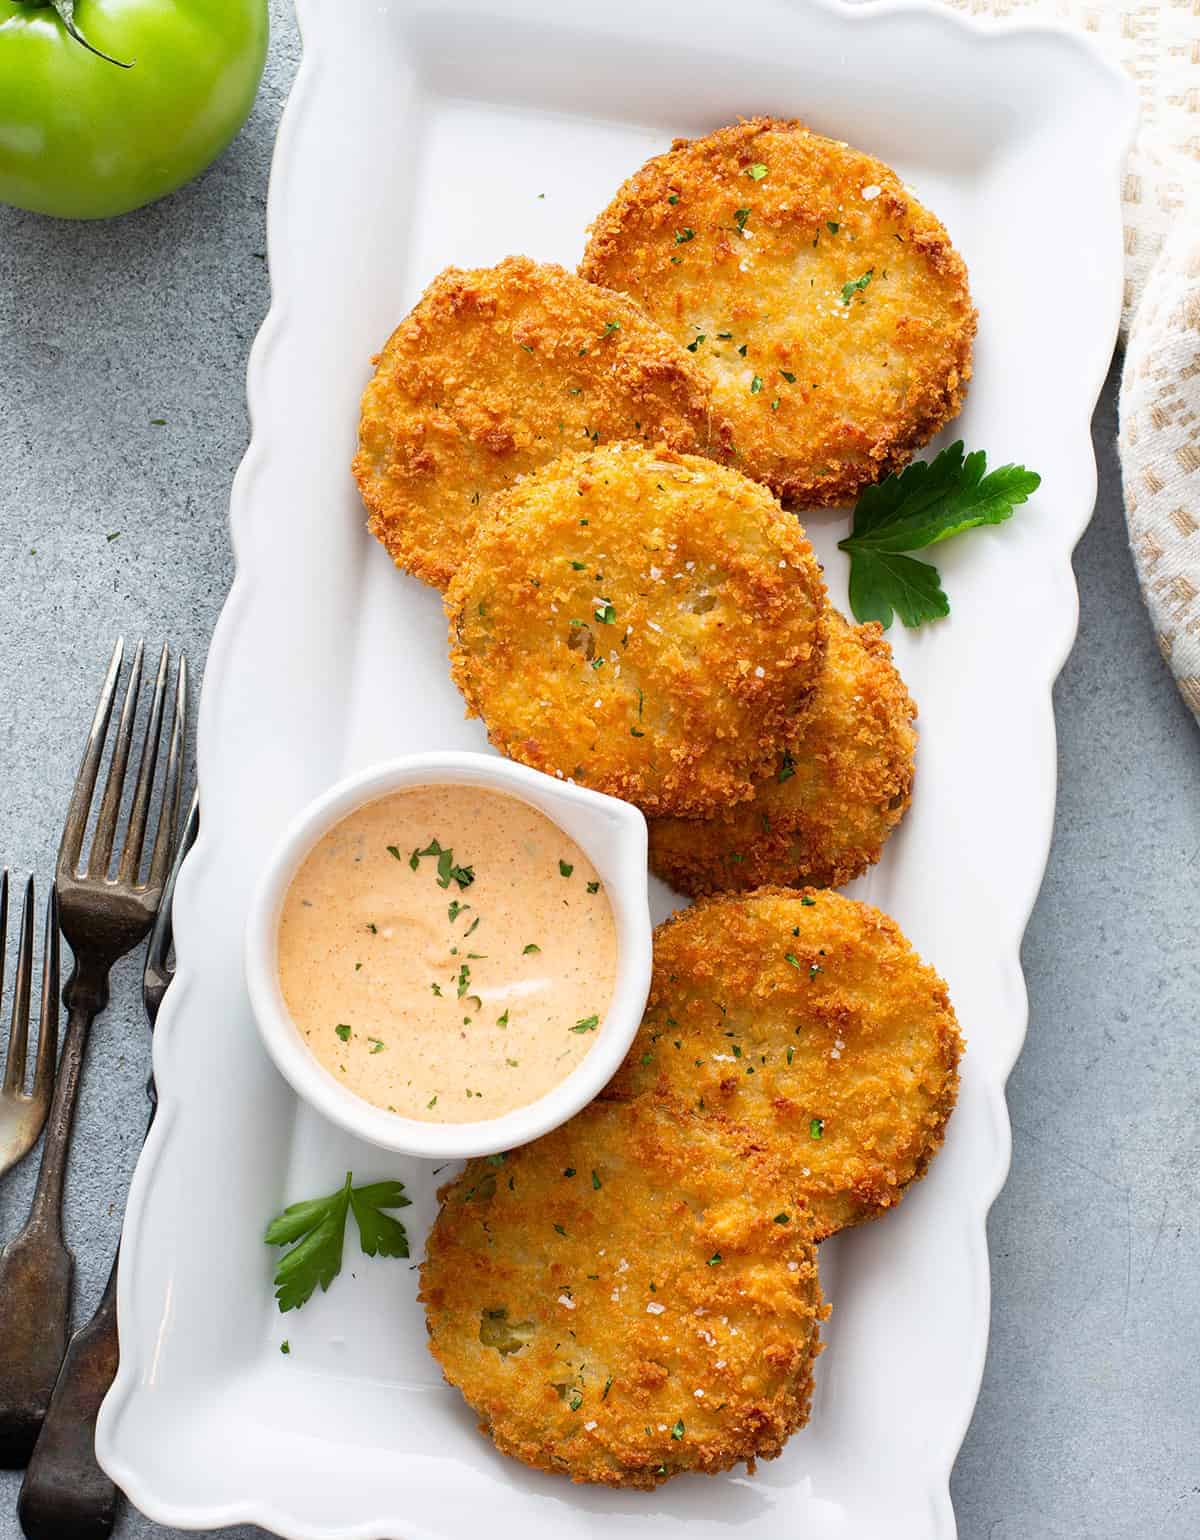 Fried green tomatoes with remoulade sauce